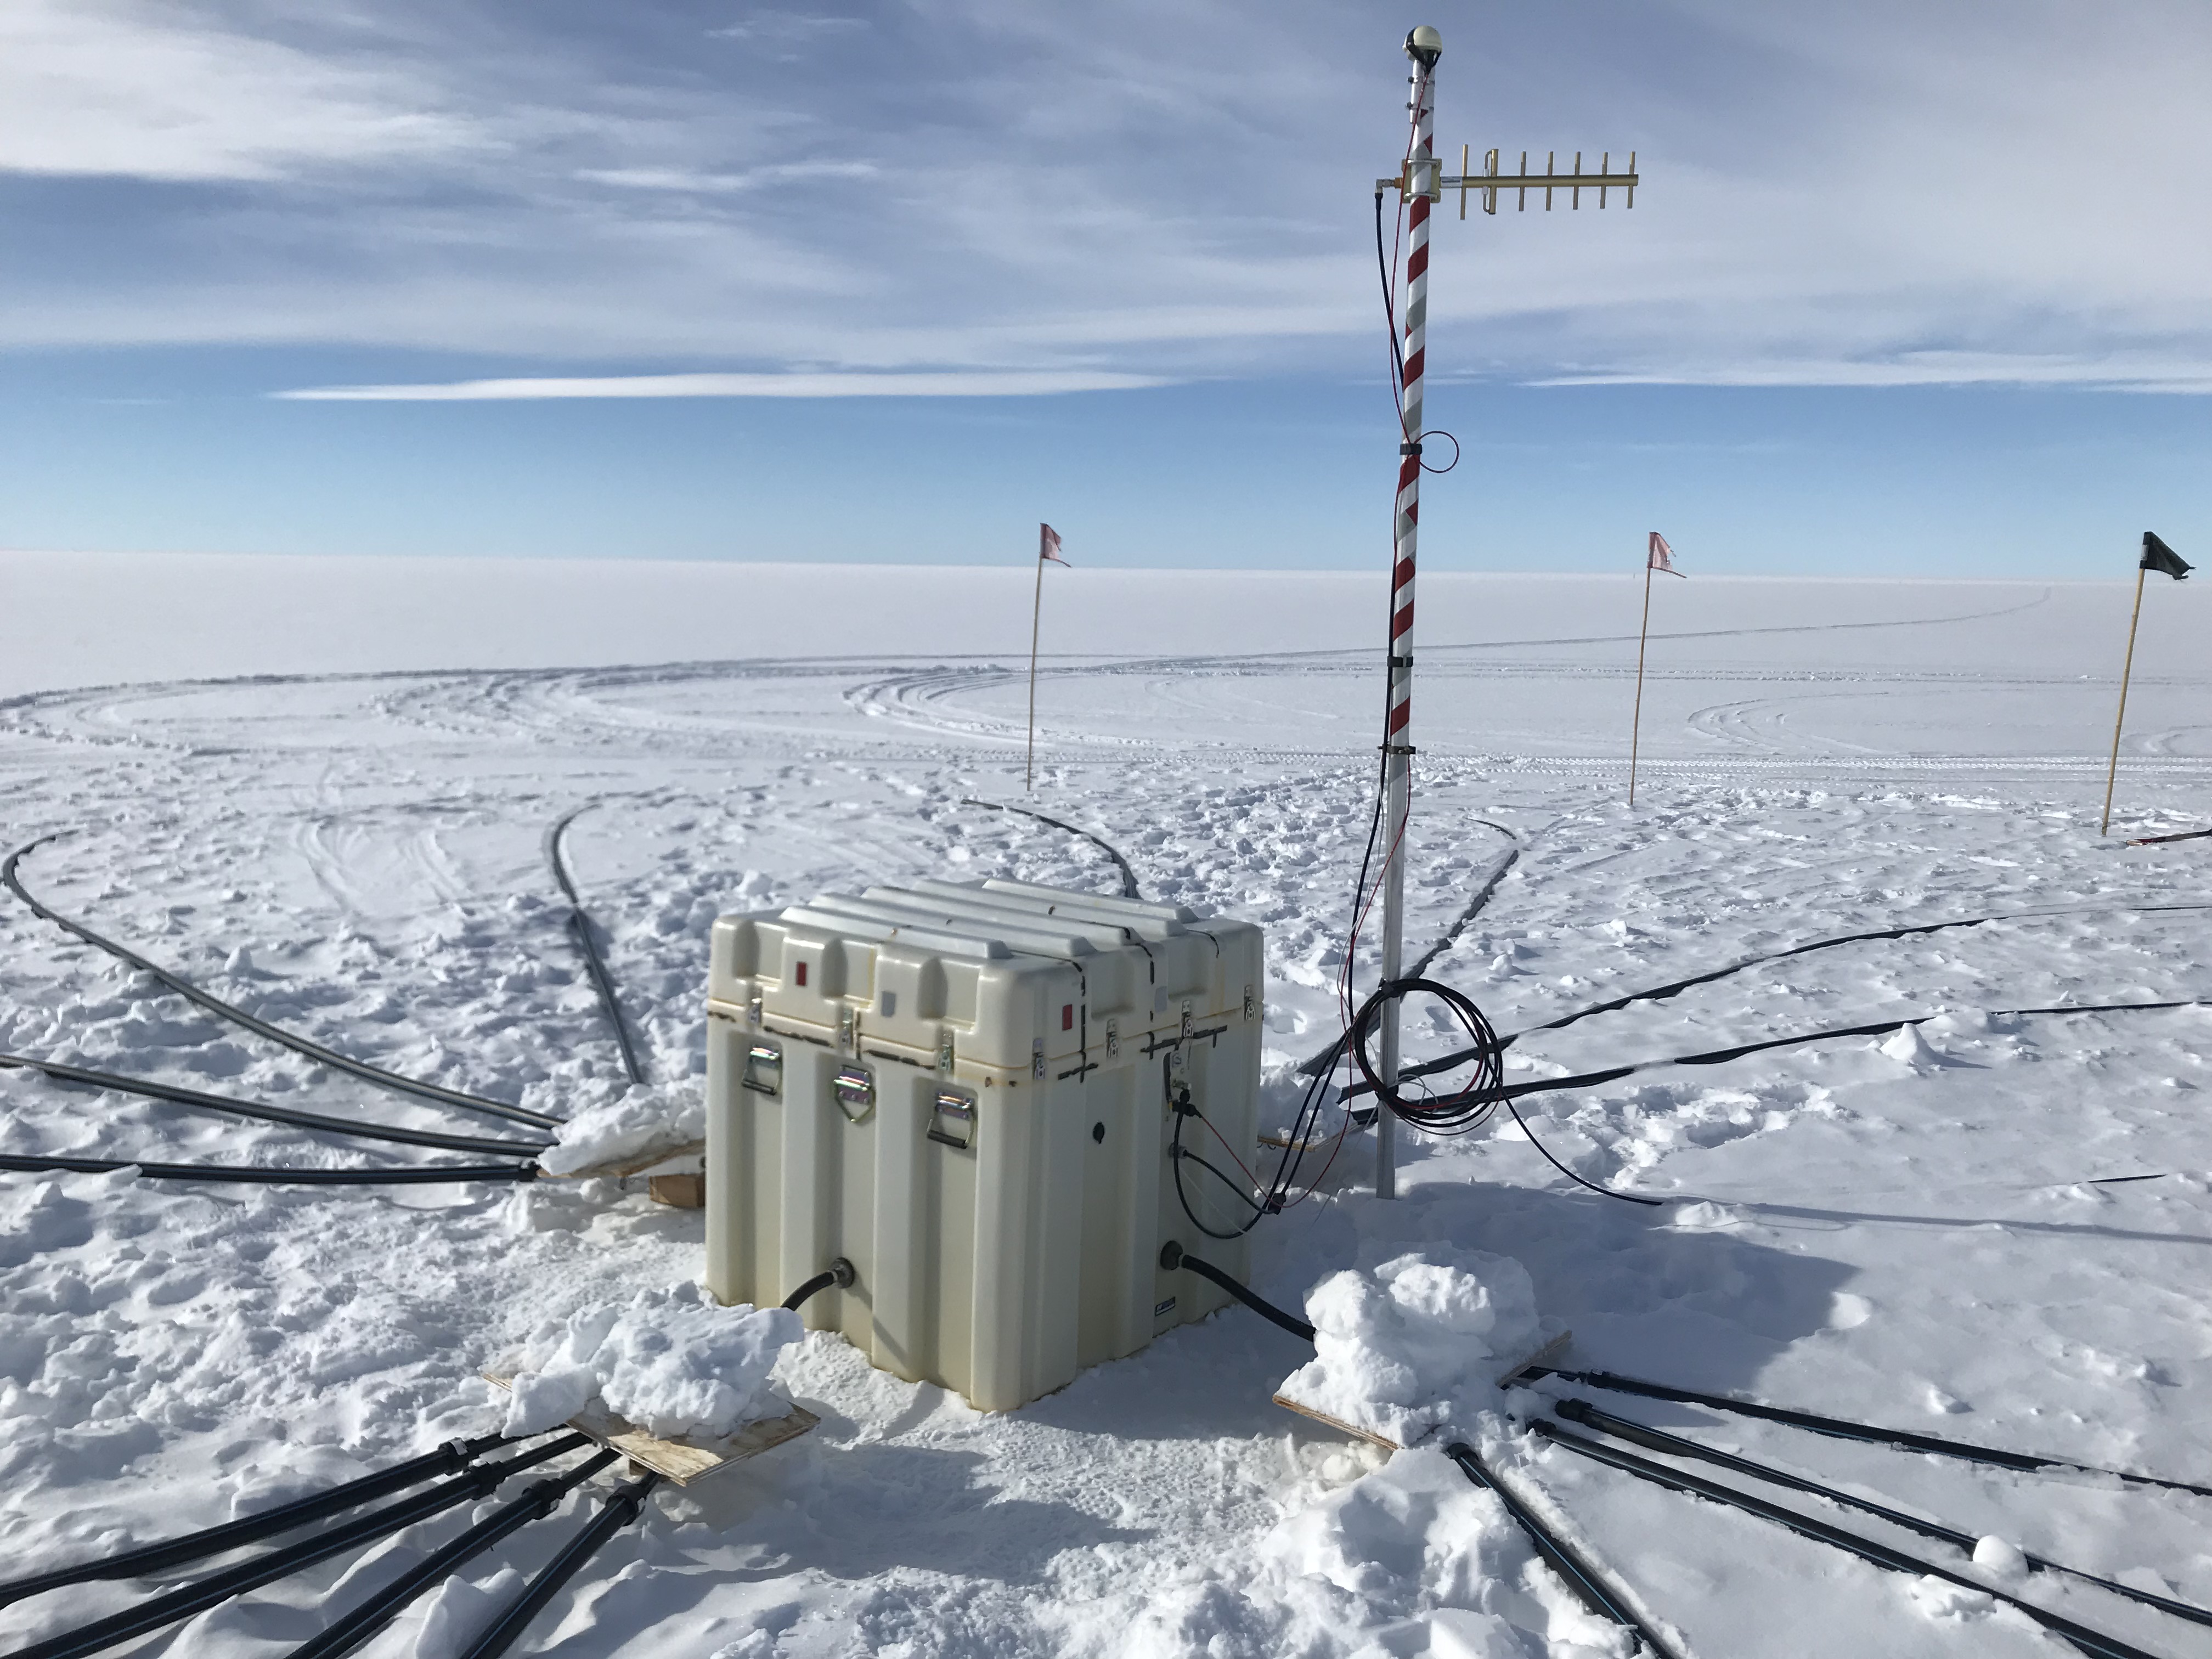 A large box, next to striped pole, with thick black wires coming out in all directions. Flags can be seen in the distance. Snow everywhere. 